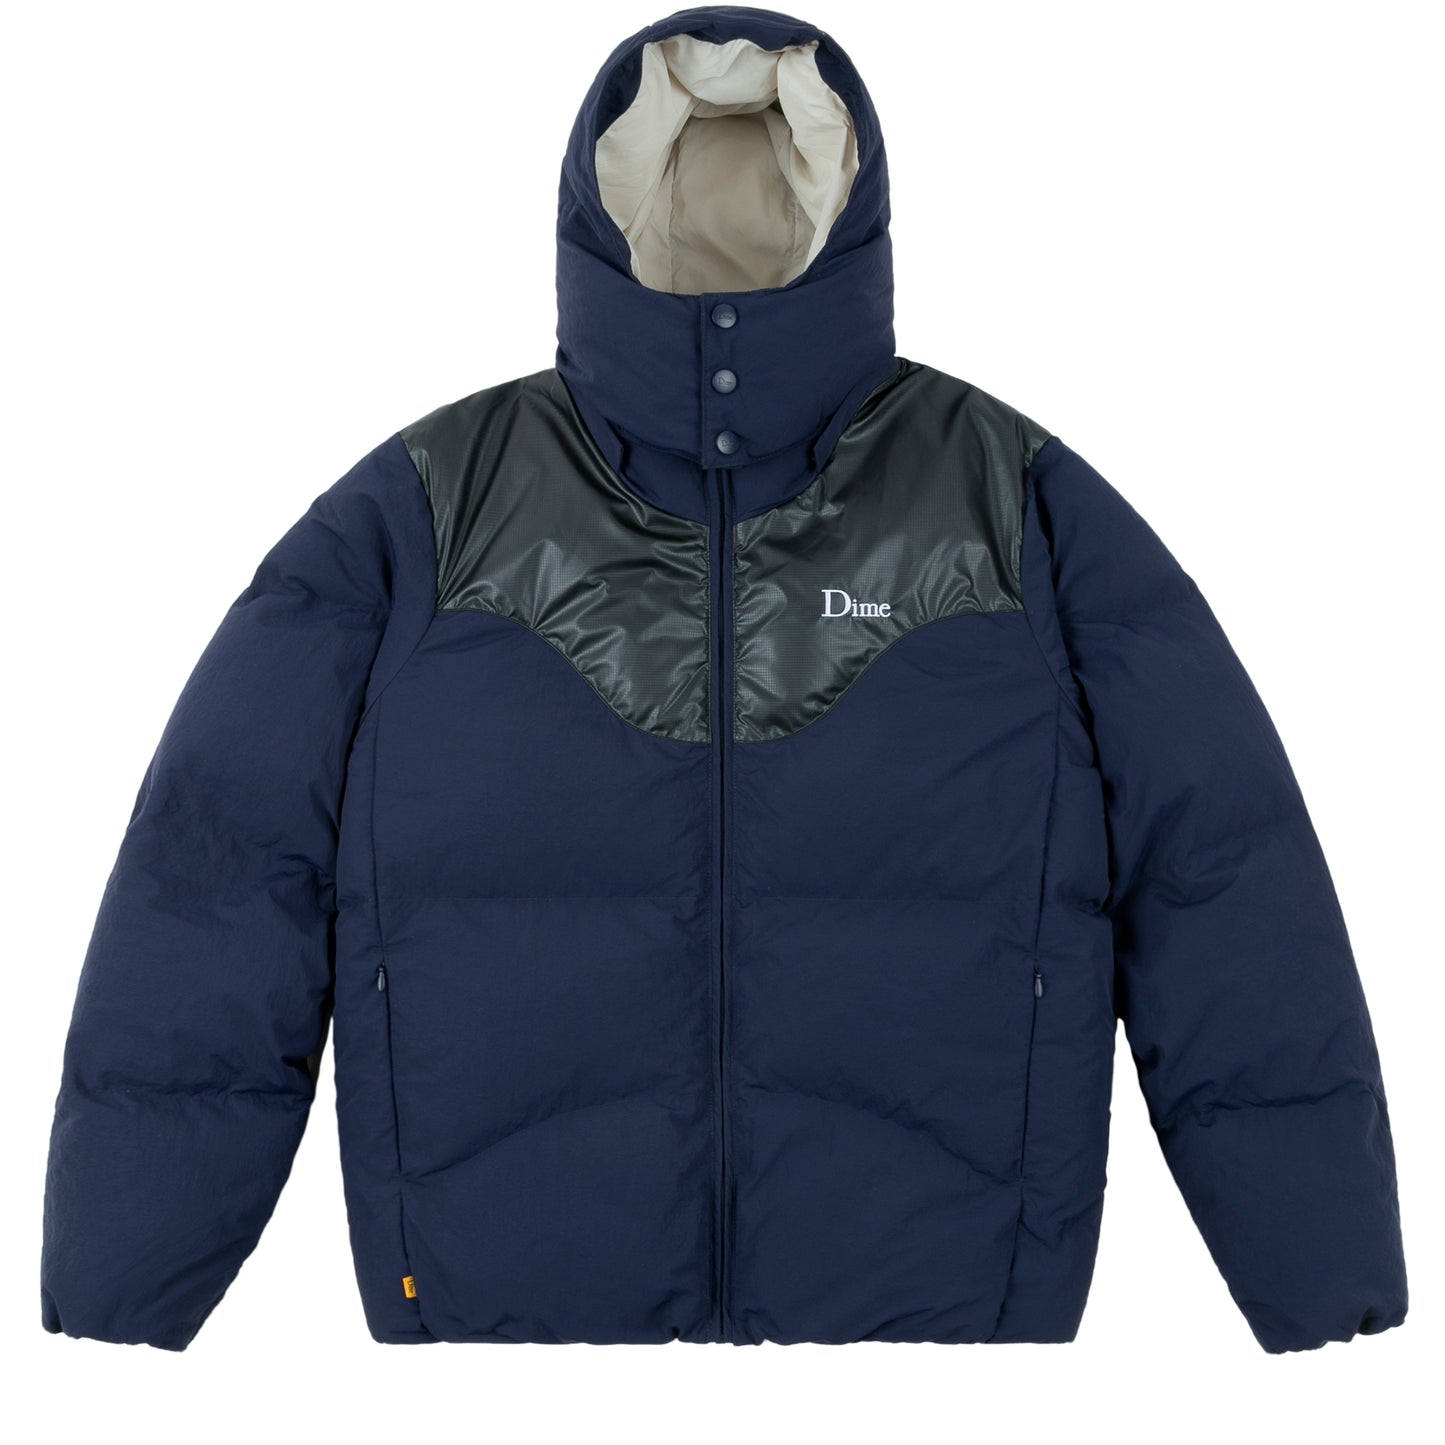 Contrast Puffer Jacket Nvy(size options listed)